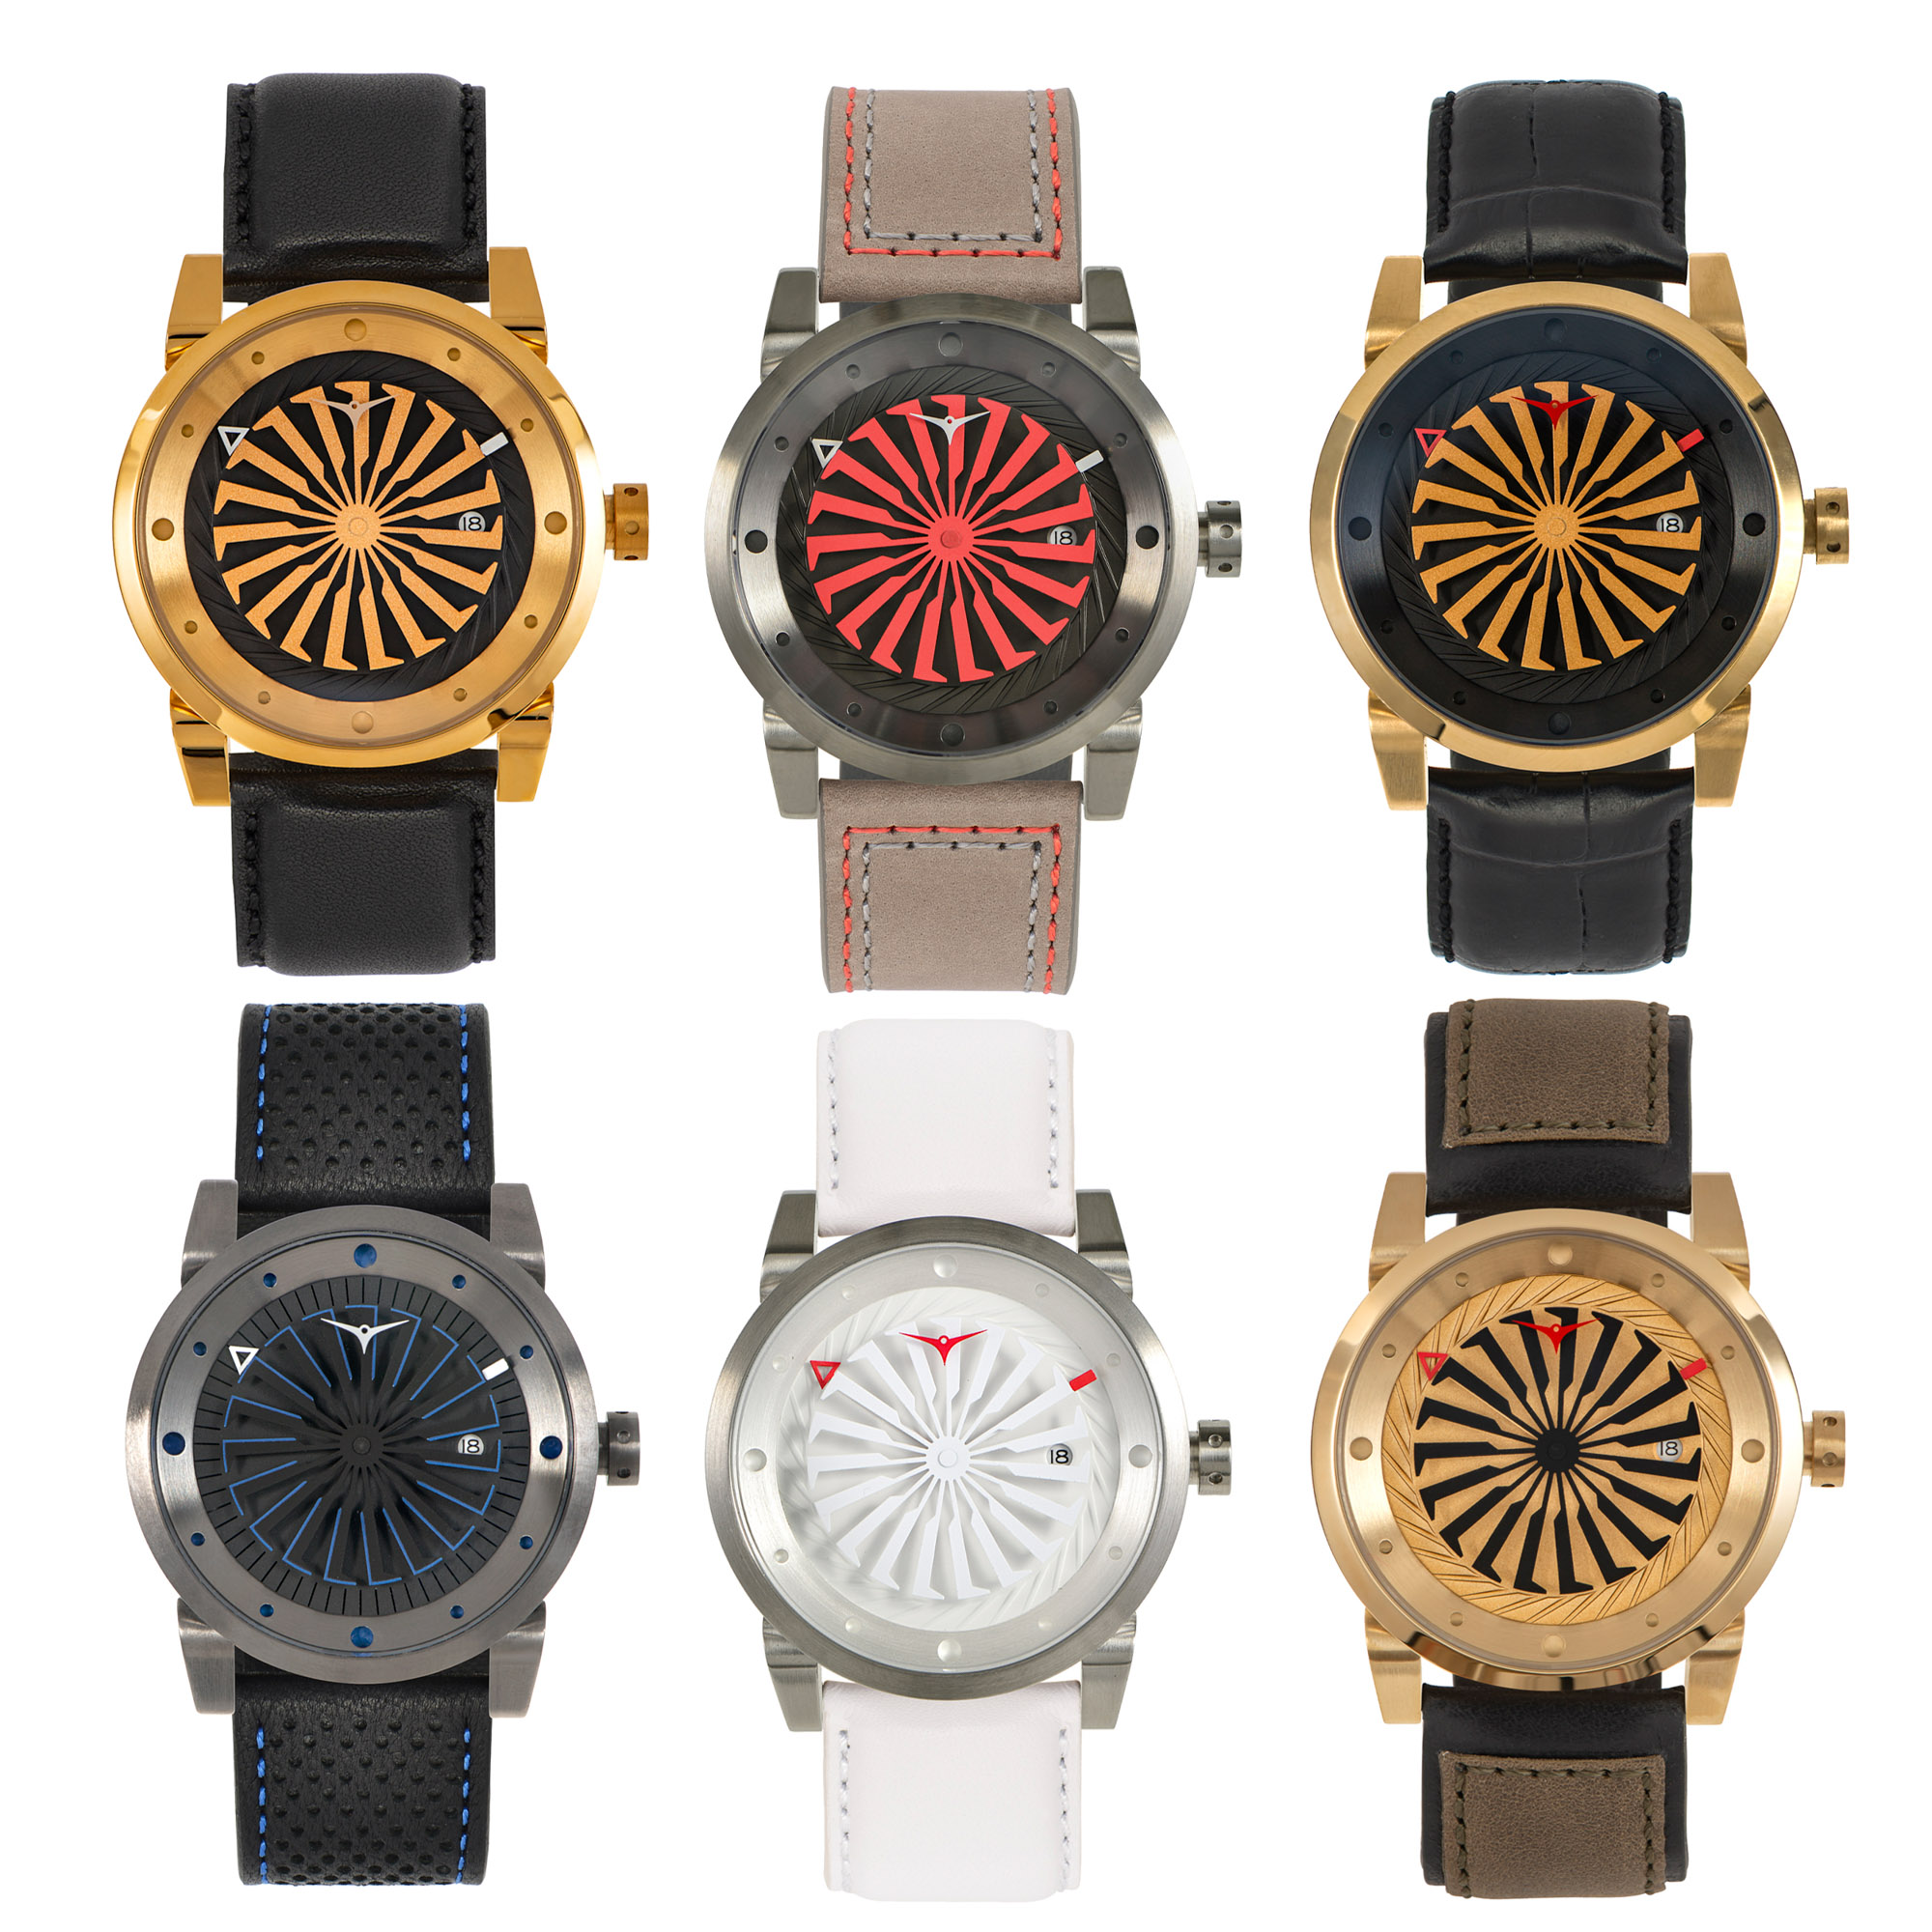 High Quality Product Photography a group of watches with different colors a sample photo of eCommerce Product Photography done by Expozme Photography Studio in Los Angeles. Amazon Product Photography